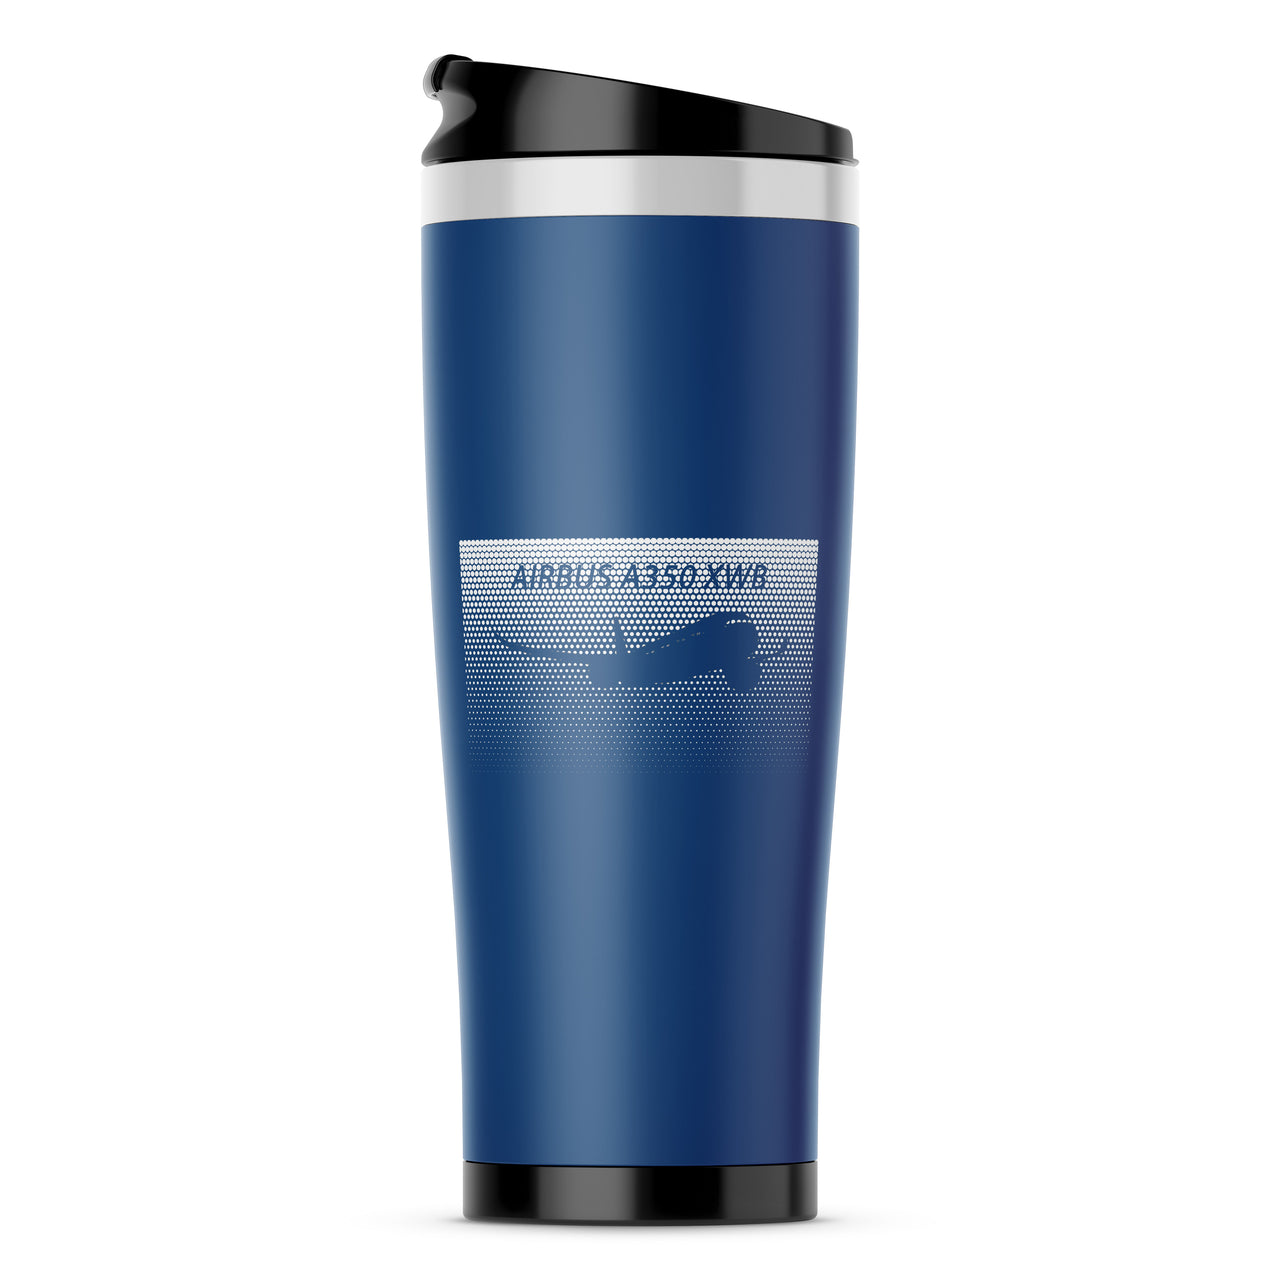 Airbus A350XWB & Dots Designed Stainless Steel Travel Mugs